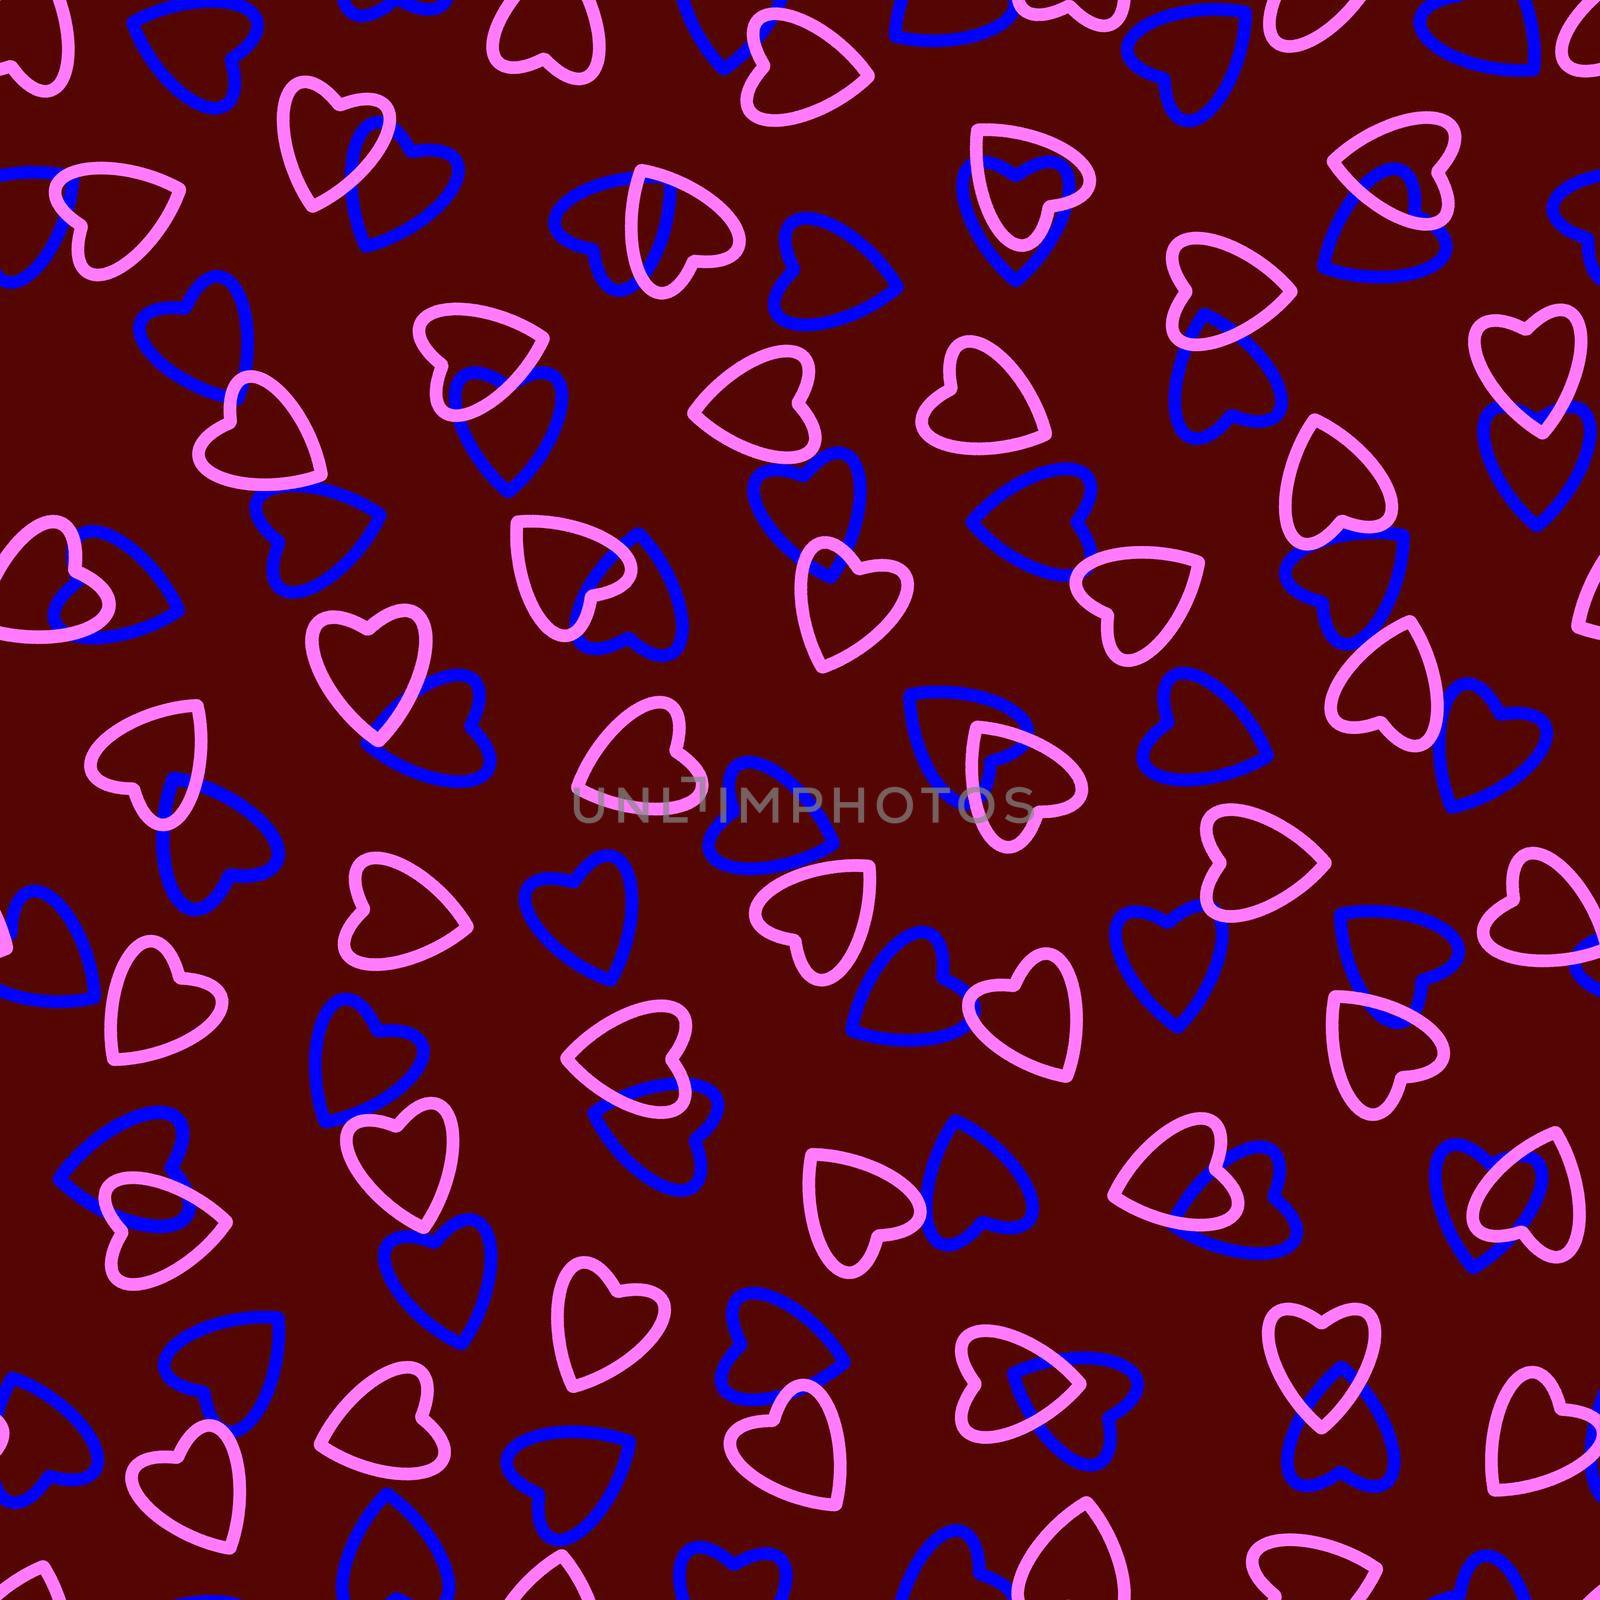 Simple hearts seamless pattern,endless chaotic texture made tiny heart silhouettes.Valentines,mothers day background.Great for Easter,wedding,scrapbook,gift wrapping paper,textiles.Blue,pink,burgundy by Angelsmoon